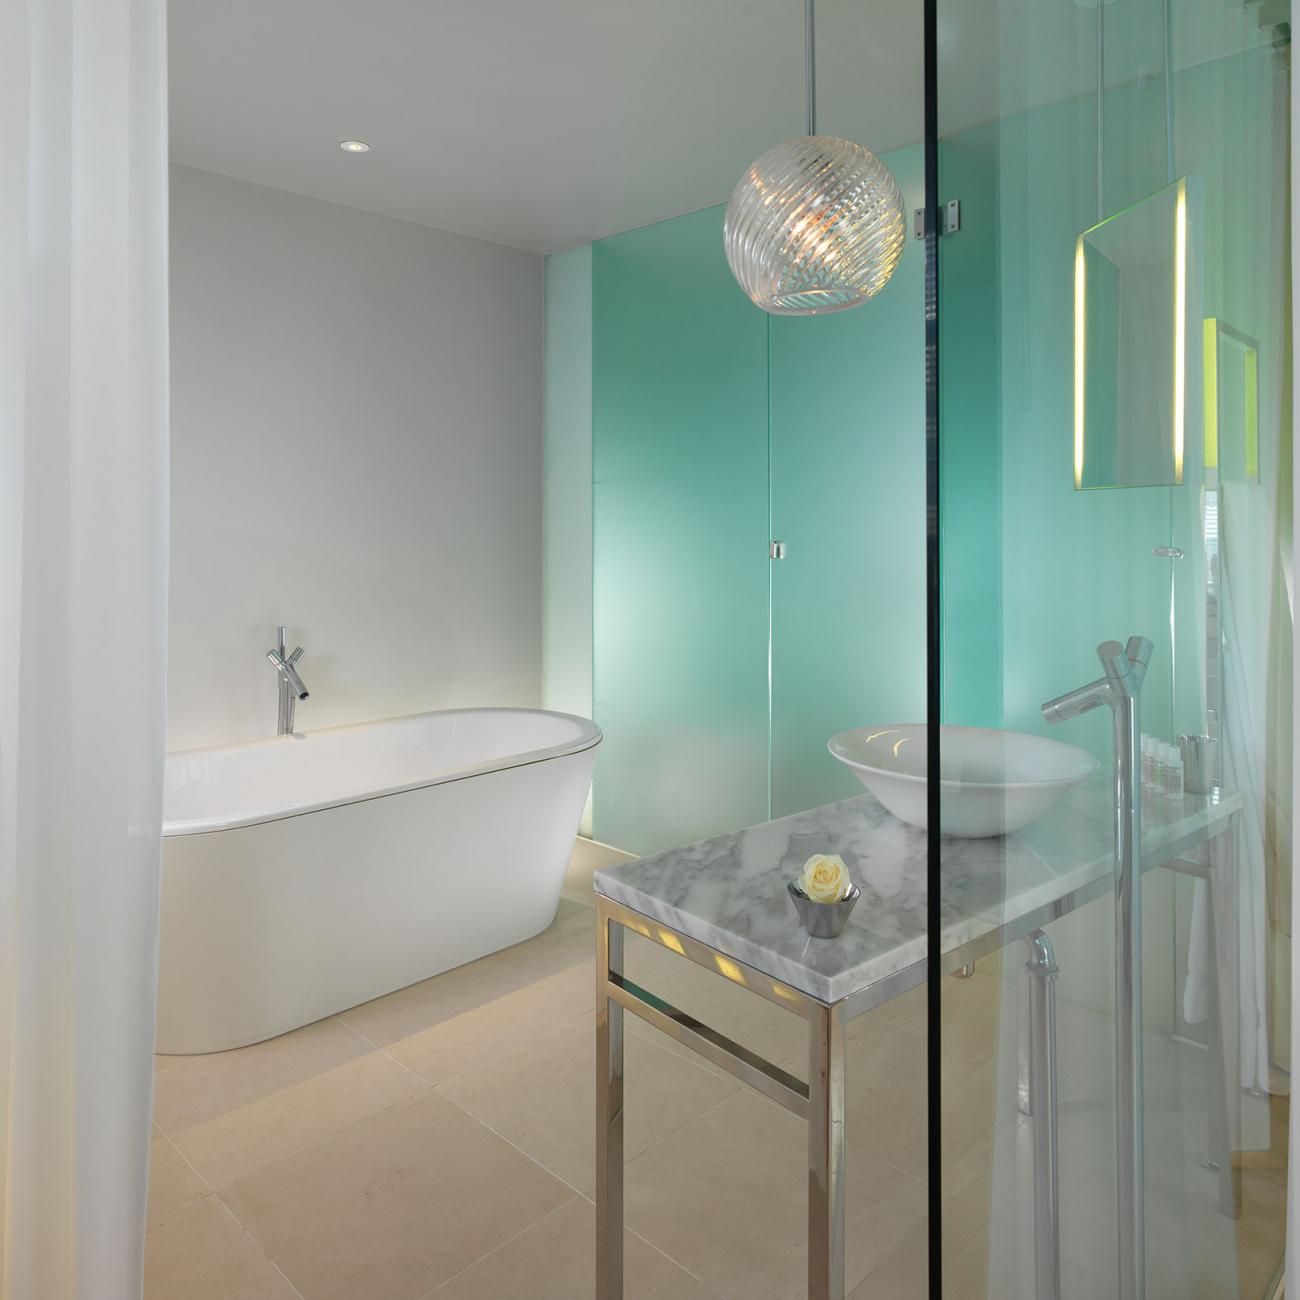 Bathroom with large white bathtub, turquoise wall, marble sink, and glass walls